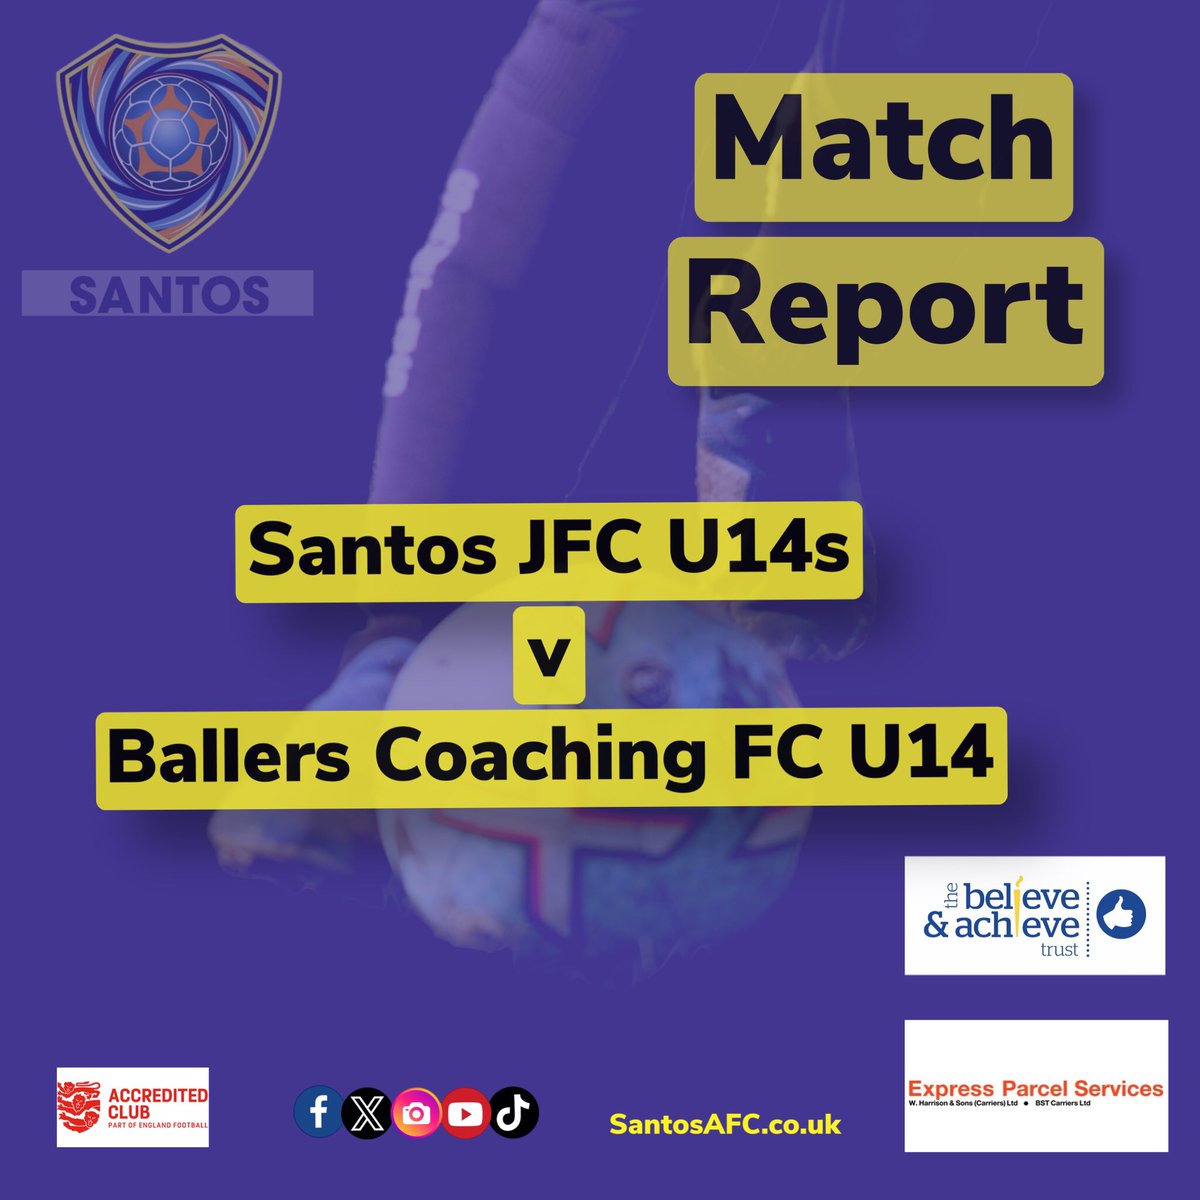 Full Match Report Available on our Facebook page!

#SantosU14s #SantosYouth #SantosAFC #u14s #football #localfootball #grassrootsfootball  #fun #unique #nuturing #inspiringtheplayersoftomorrow #oldham #emjfl #EPS_expressparcelservices #theachievenandbelievetrust